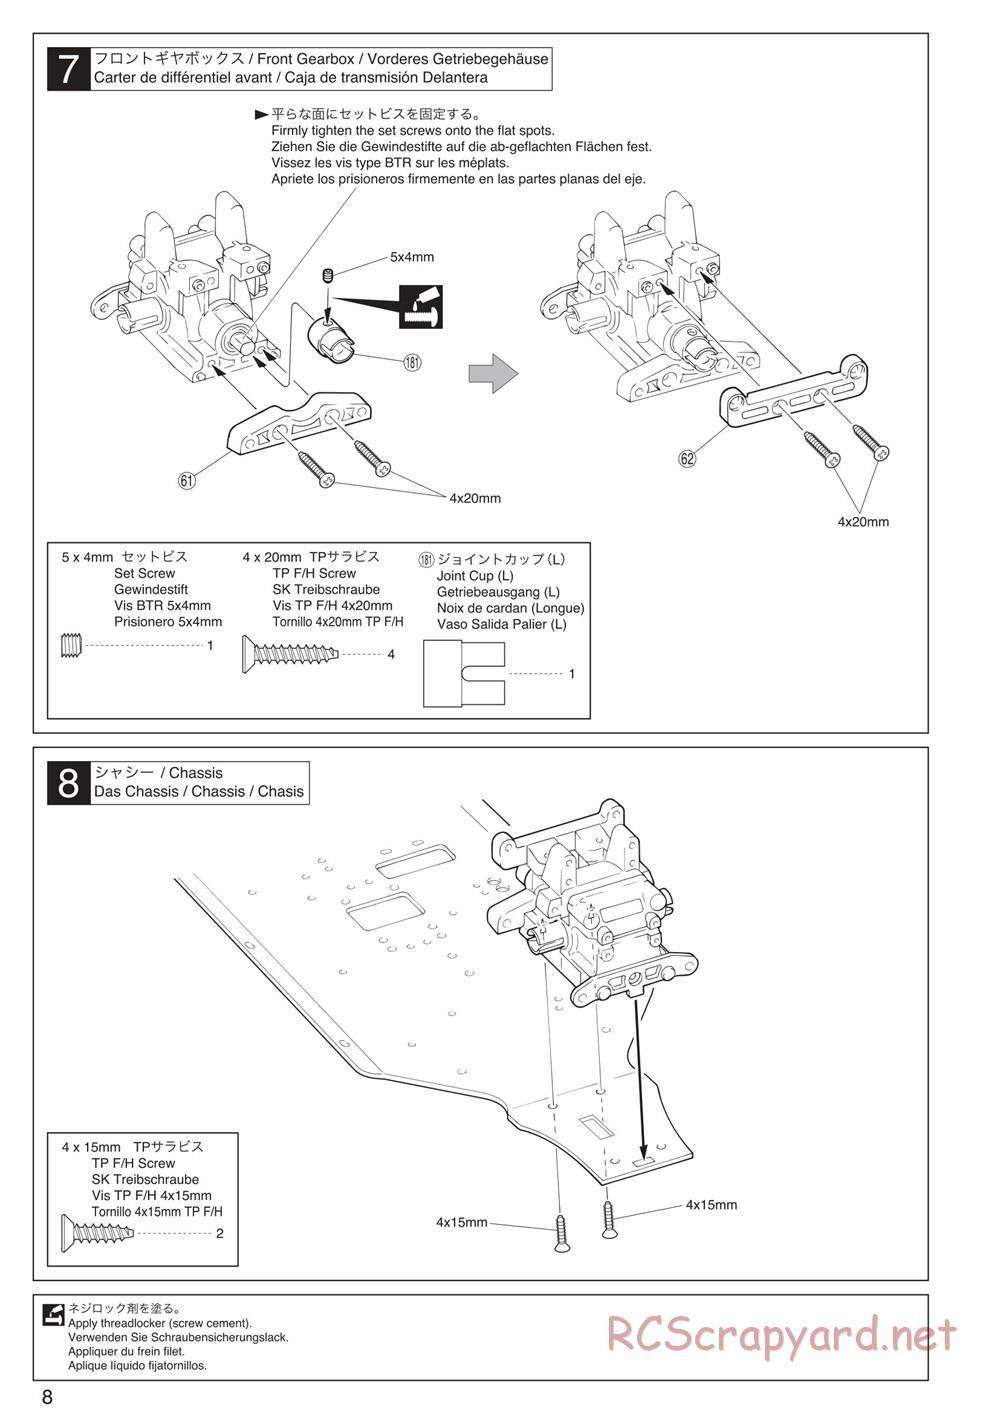 Kyosho - Inferno Neo ST 3.0 - Manual - Page 8